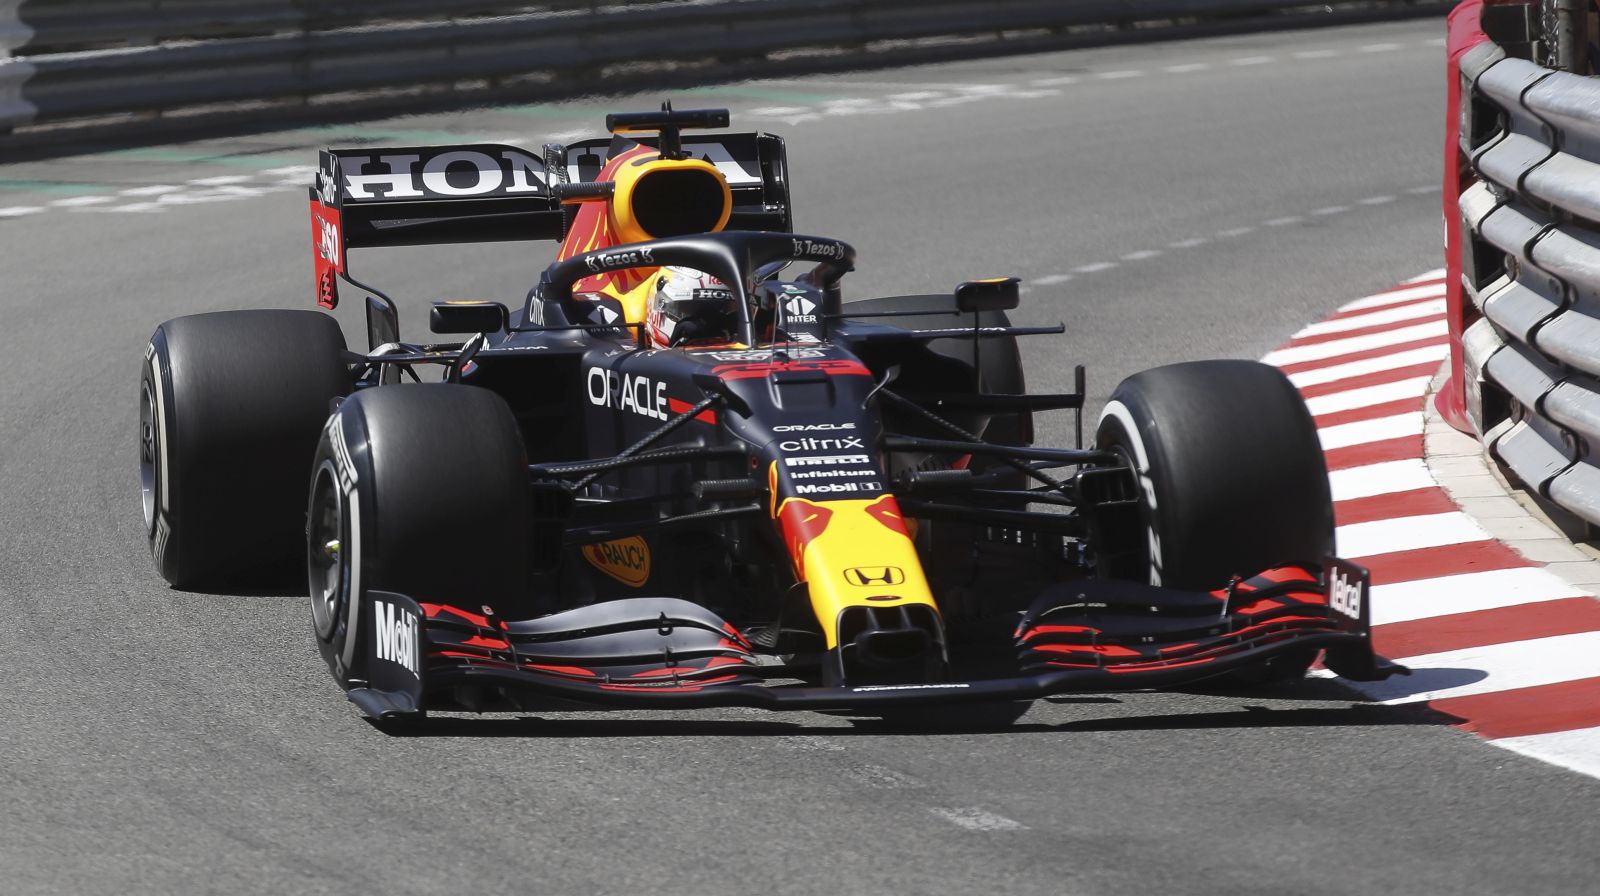 epa09214488 Dutch Formula One driver Max Verstappen of Red Bull Racing in action during the first practice session of the Formula One Grand Prix of Monaco at the Circuit de Monaco in Monte Carlo, 20 May 2021. The Formula One Grand Prix of Monaco will take place on 23 May 2021.  EPA/SEBASTIEN NOGIER